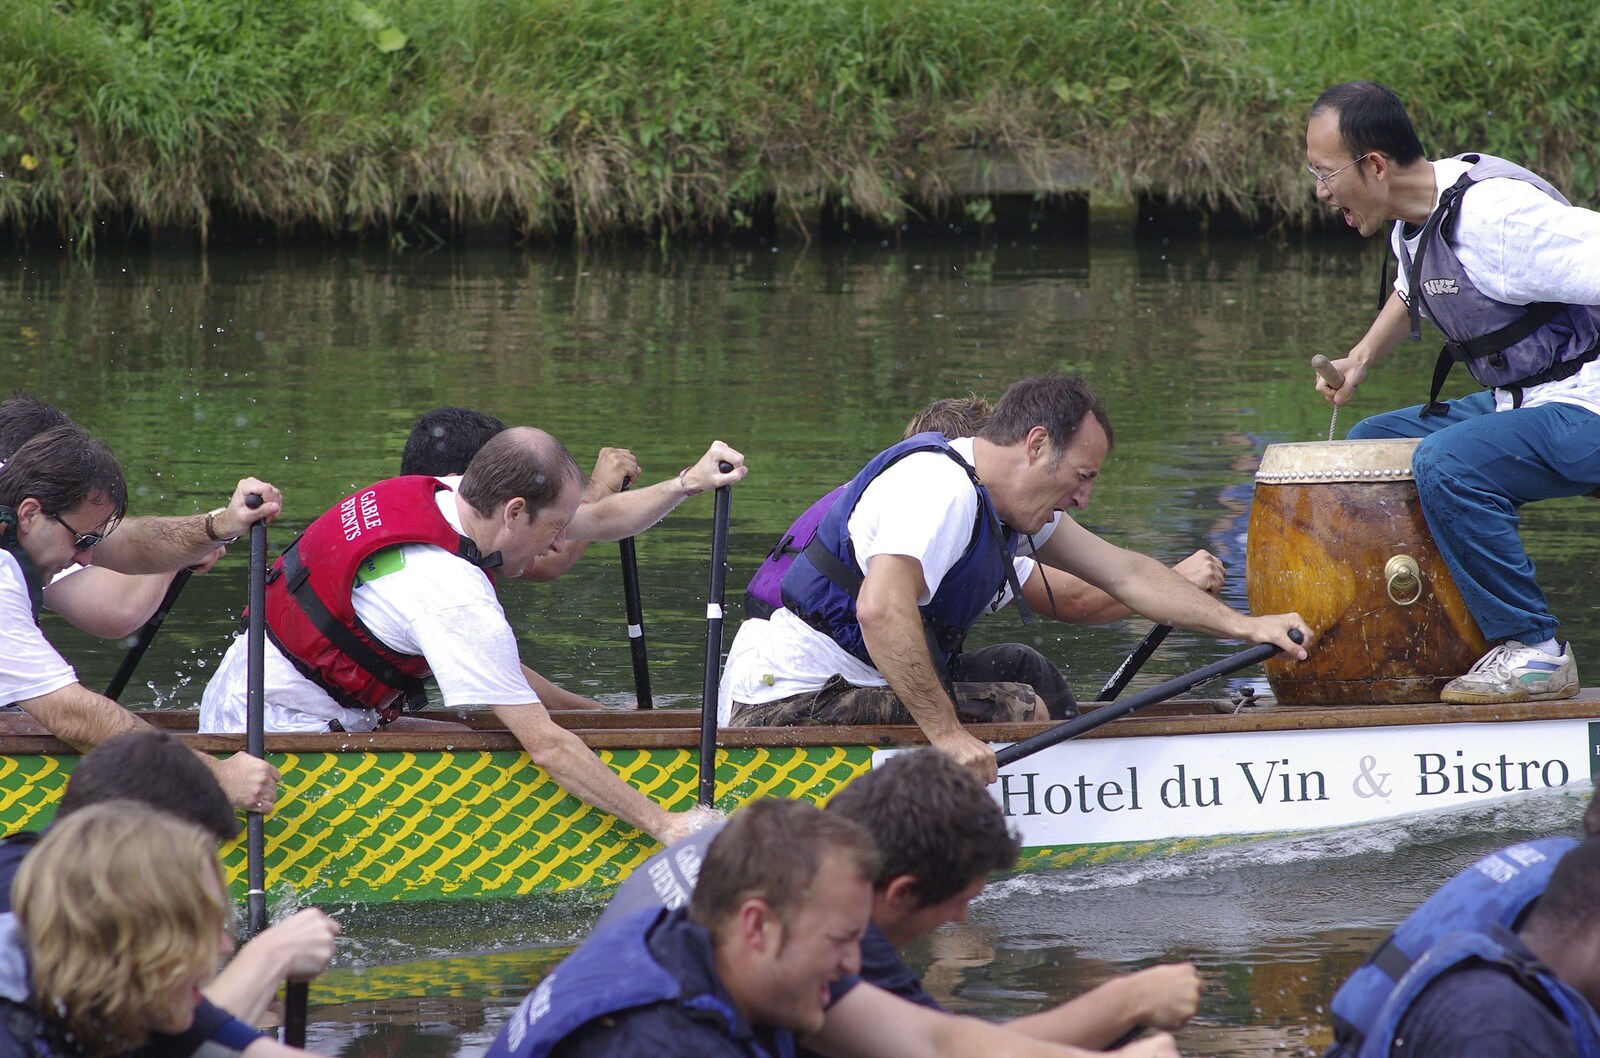 Qualcomm's Dragon-Boat Racing, Fen Ditton, Cambridge - 8th September 2007: Gordon (on drums) gets stuck in